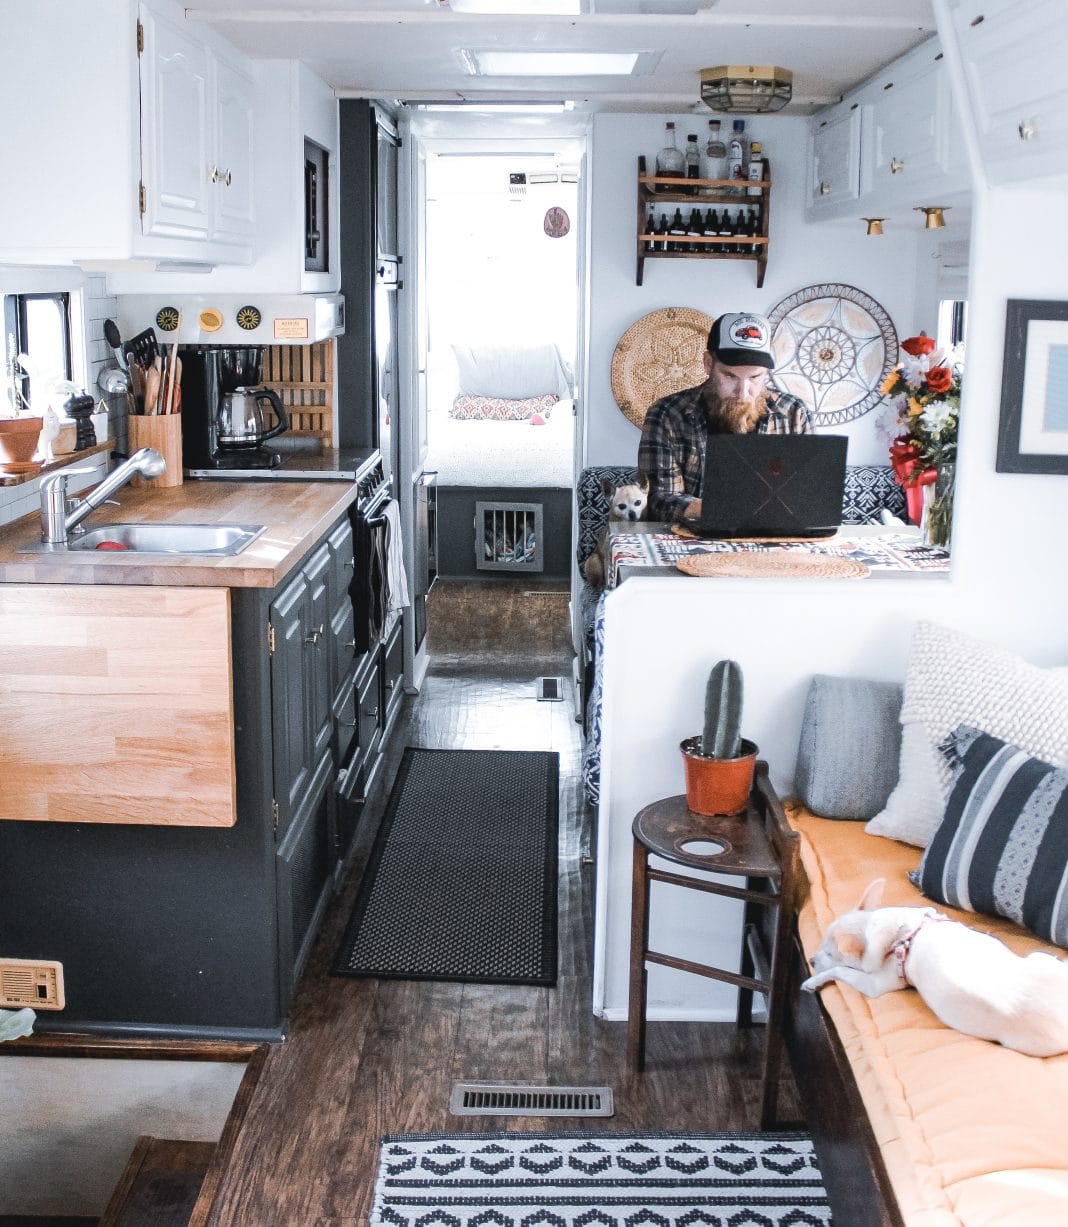 Bearded man working on laptop in nicely decorated RV